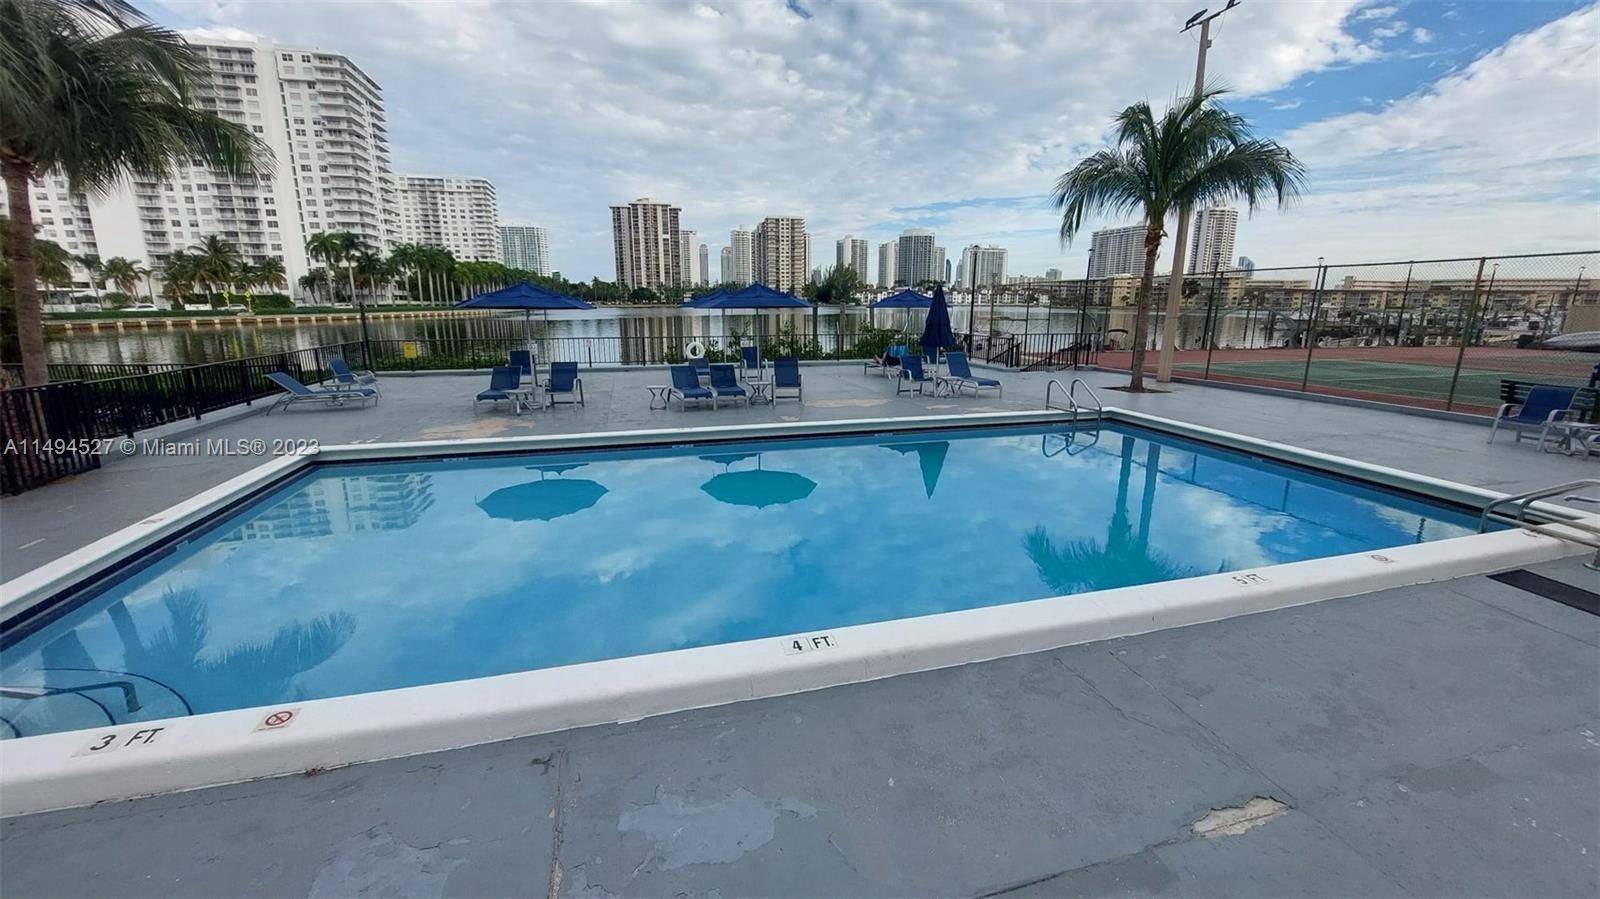 Great large 1, 687 SqFt unit with 3 bedrooms and 3 full bathrooms in a building located in Aventura at the entrance to Williams Island.